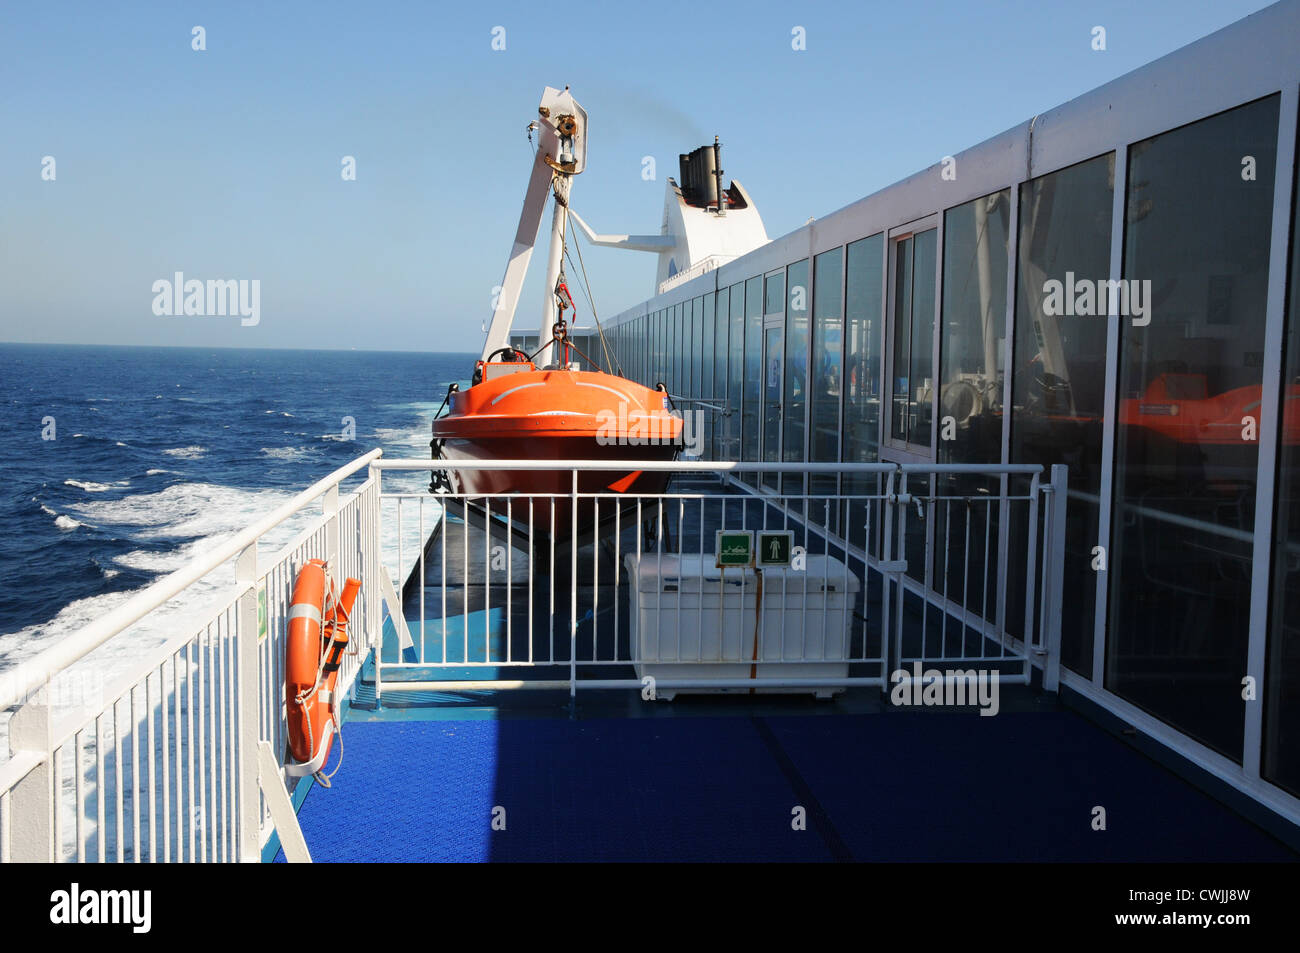 View down starboard side, to stern of Cap Finistere cruise ferry, showing lifeboat, funnel, calm blue sea, Bay of Biscay. Stock Photo